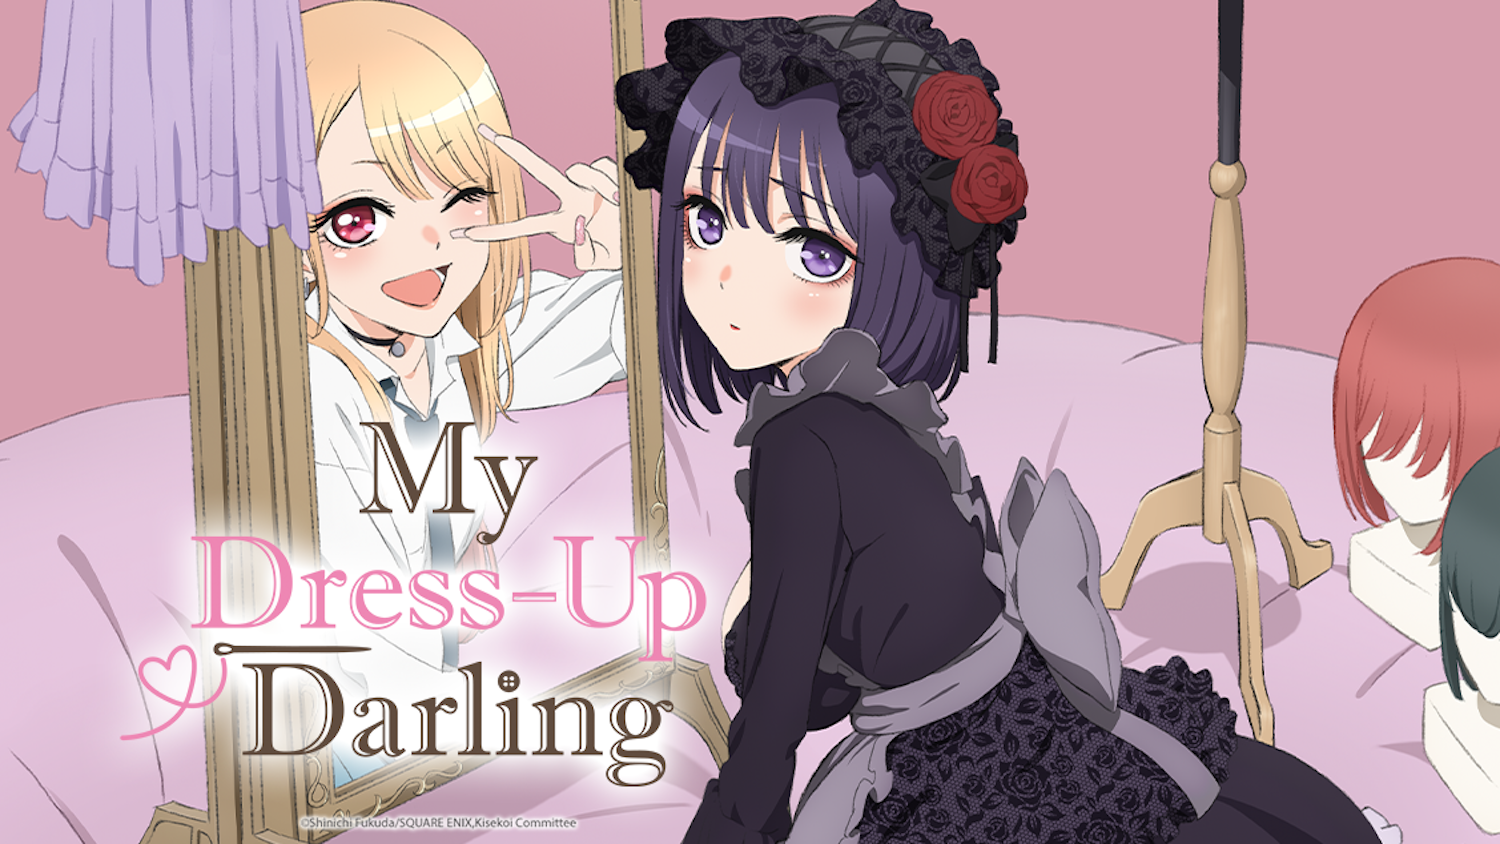 Marin Kitagawa, the main female lead of the 'My Dress-Up Darling' anime, cosplaying as one of her favorite characters while looking in a mirror. Fans are hoping for a 'My Dress-Up Darling' Season 2 announcement soon.